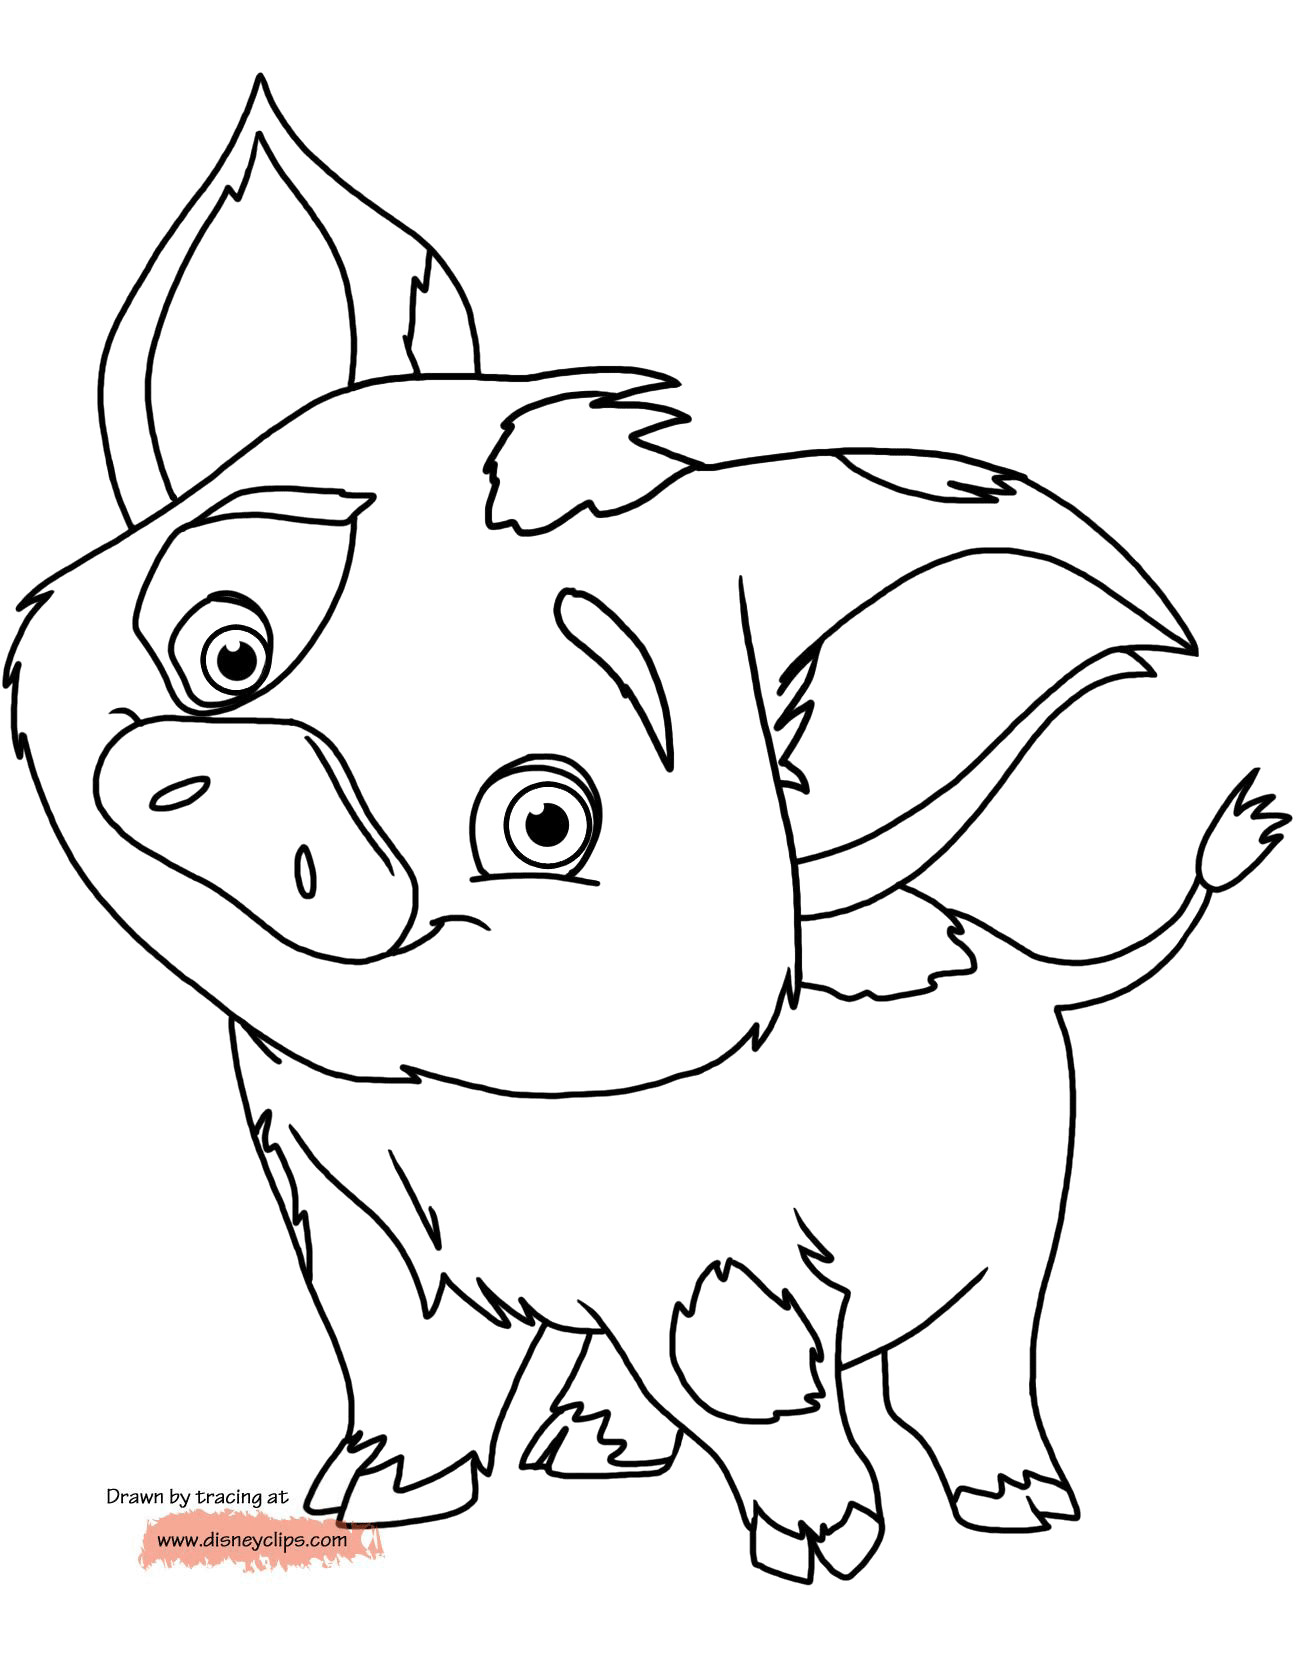 21 Best Ideas Moana Baby Coloring Pages - Home, Family, Style and Art Ideas